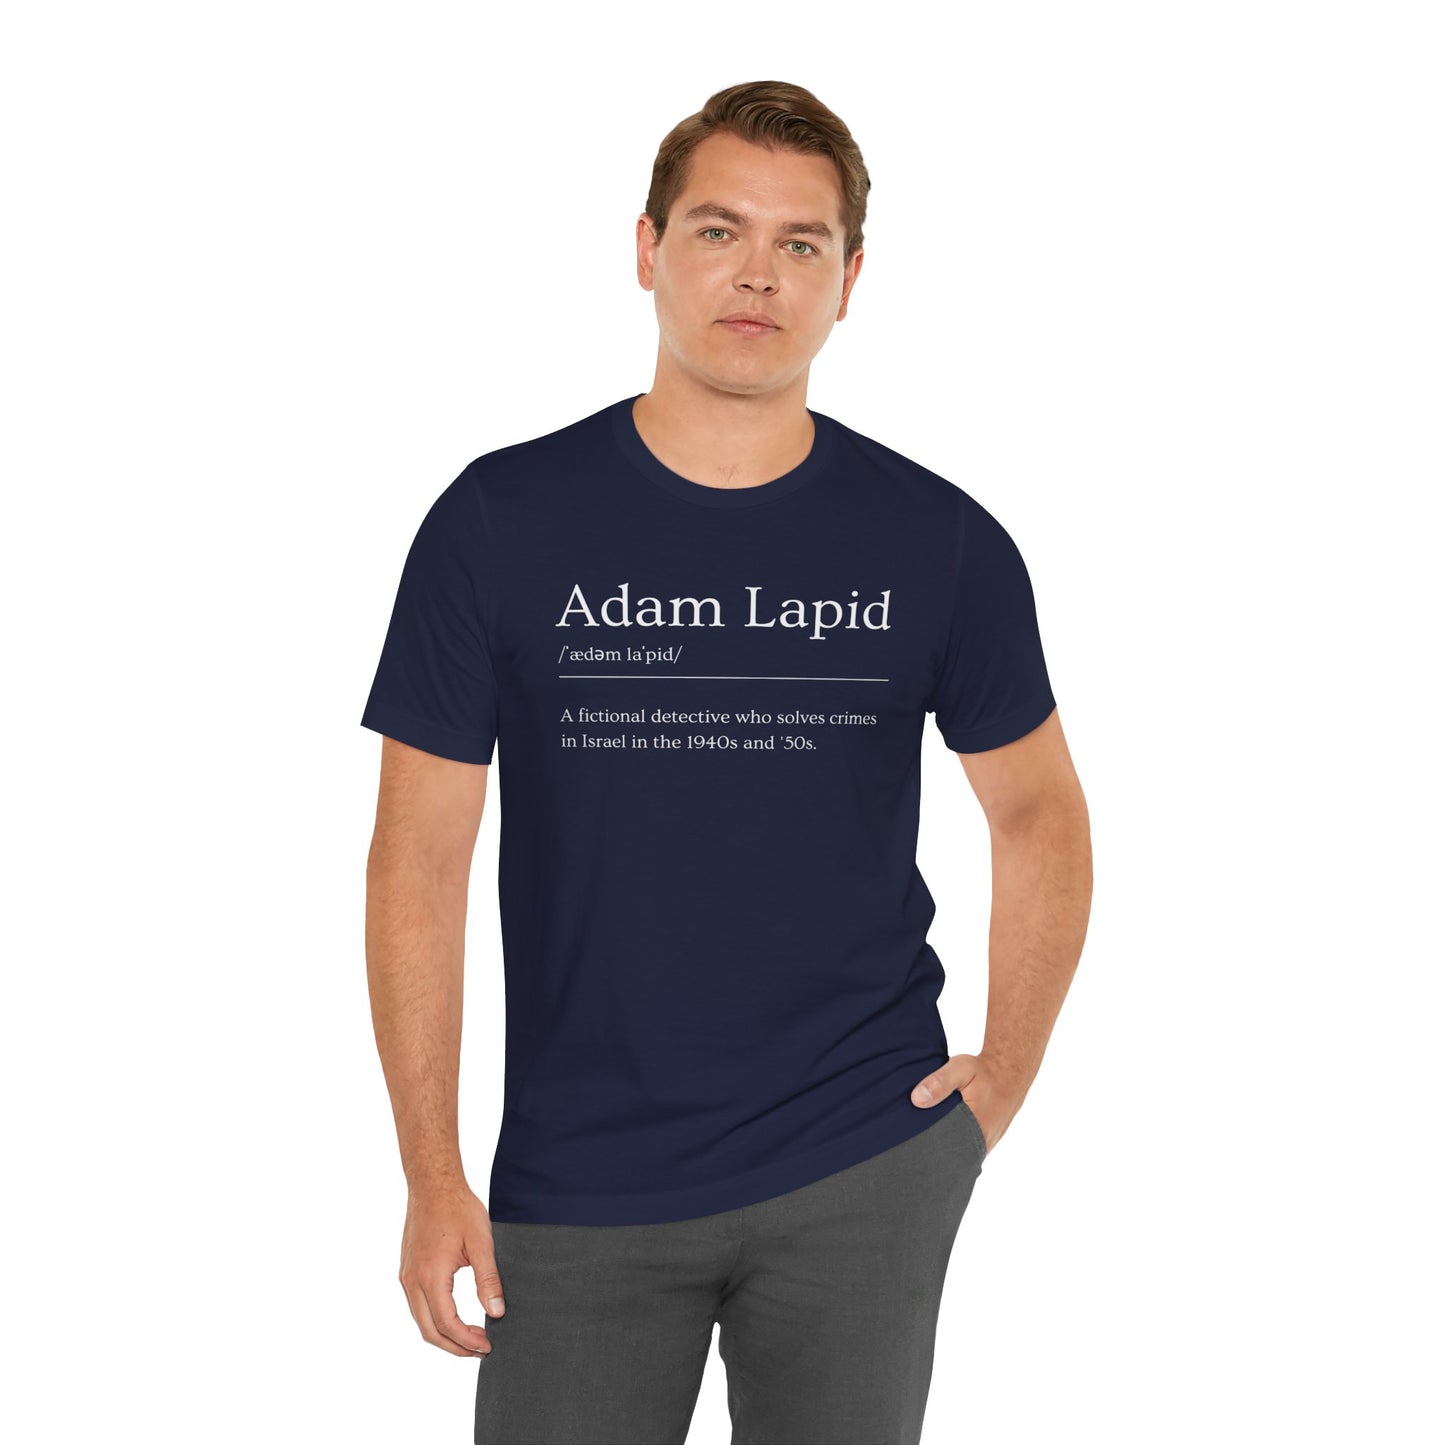 A Unisex Short Sleeve Tee with a Tongue-in-Cheek Definition of Adam Lapid, Fictional PI